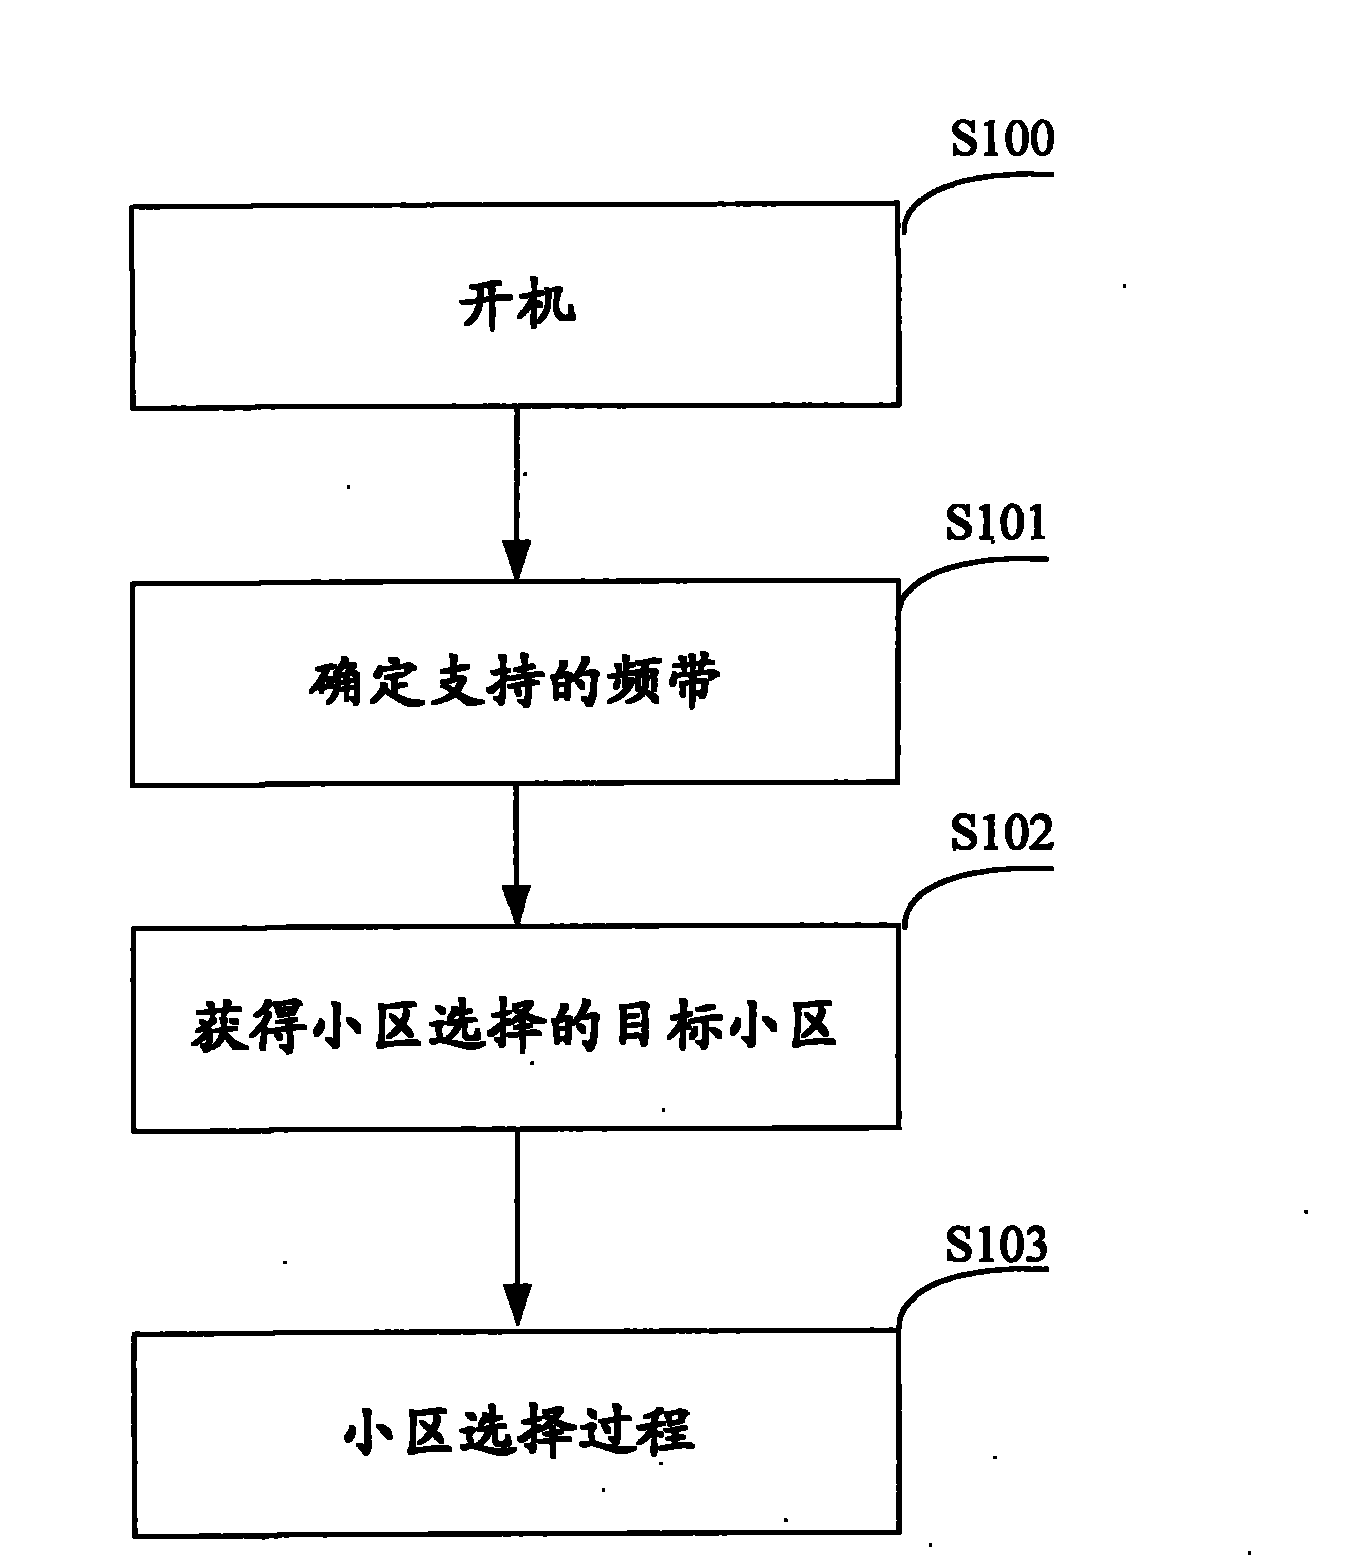 Method for quickly obtaining migration of system time in wideband code division multiple access (WCDMA) communication system